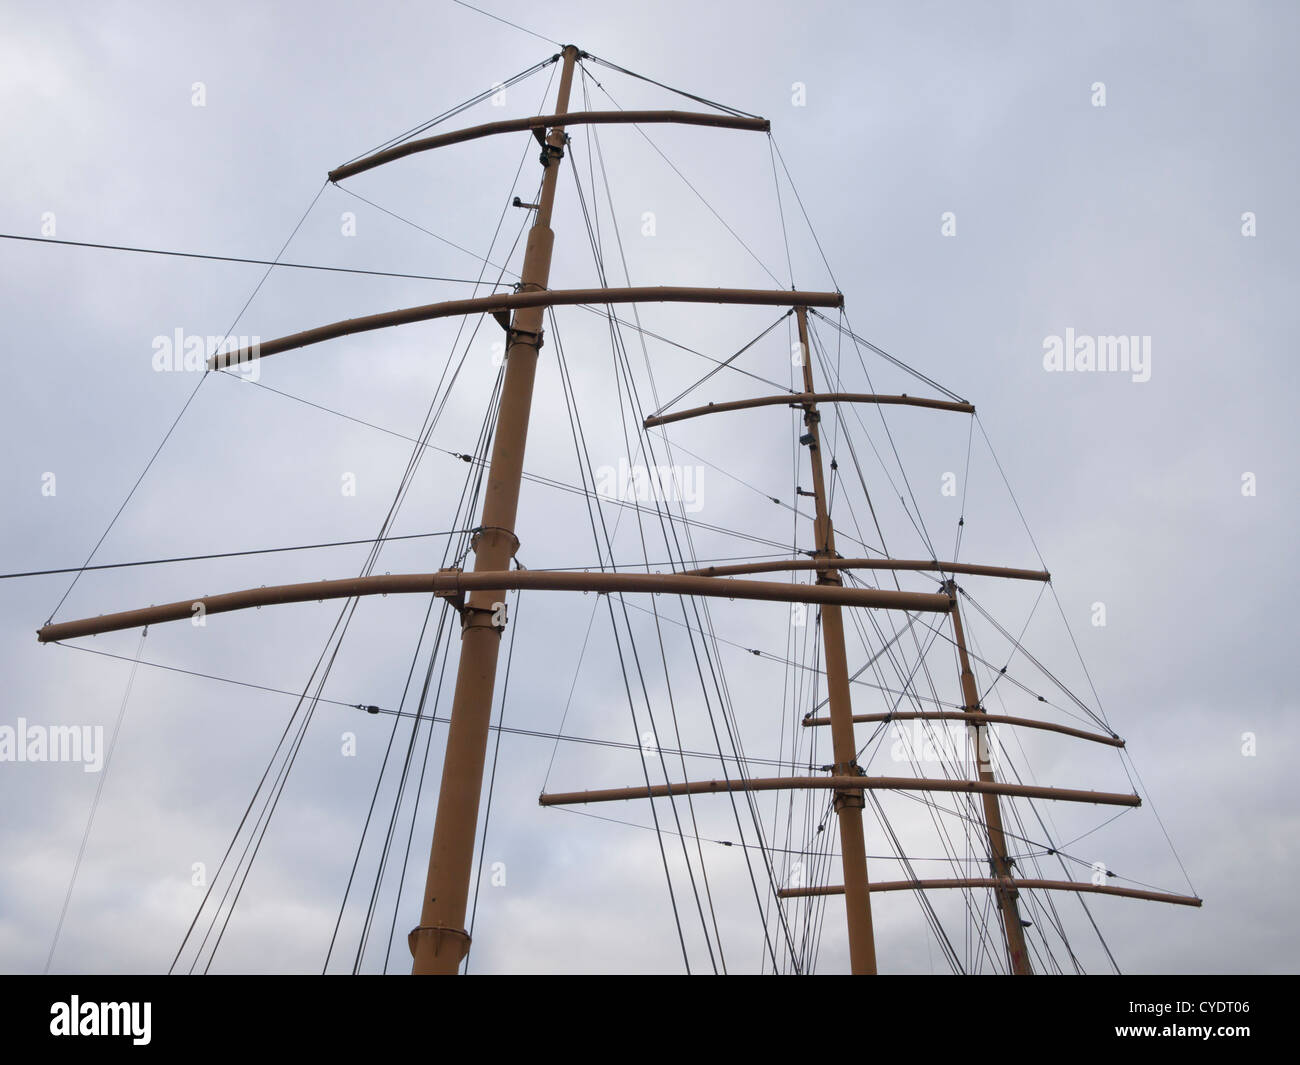 rigs of tall ships without sails from the harbour of Oslo Norway, spars and cordage Stock Photo